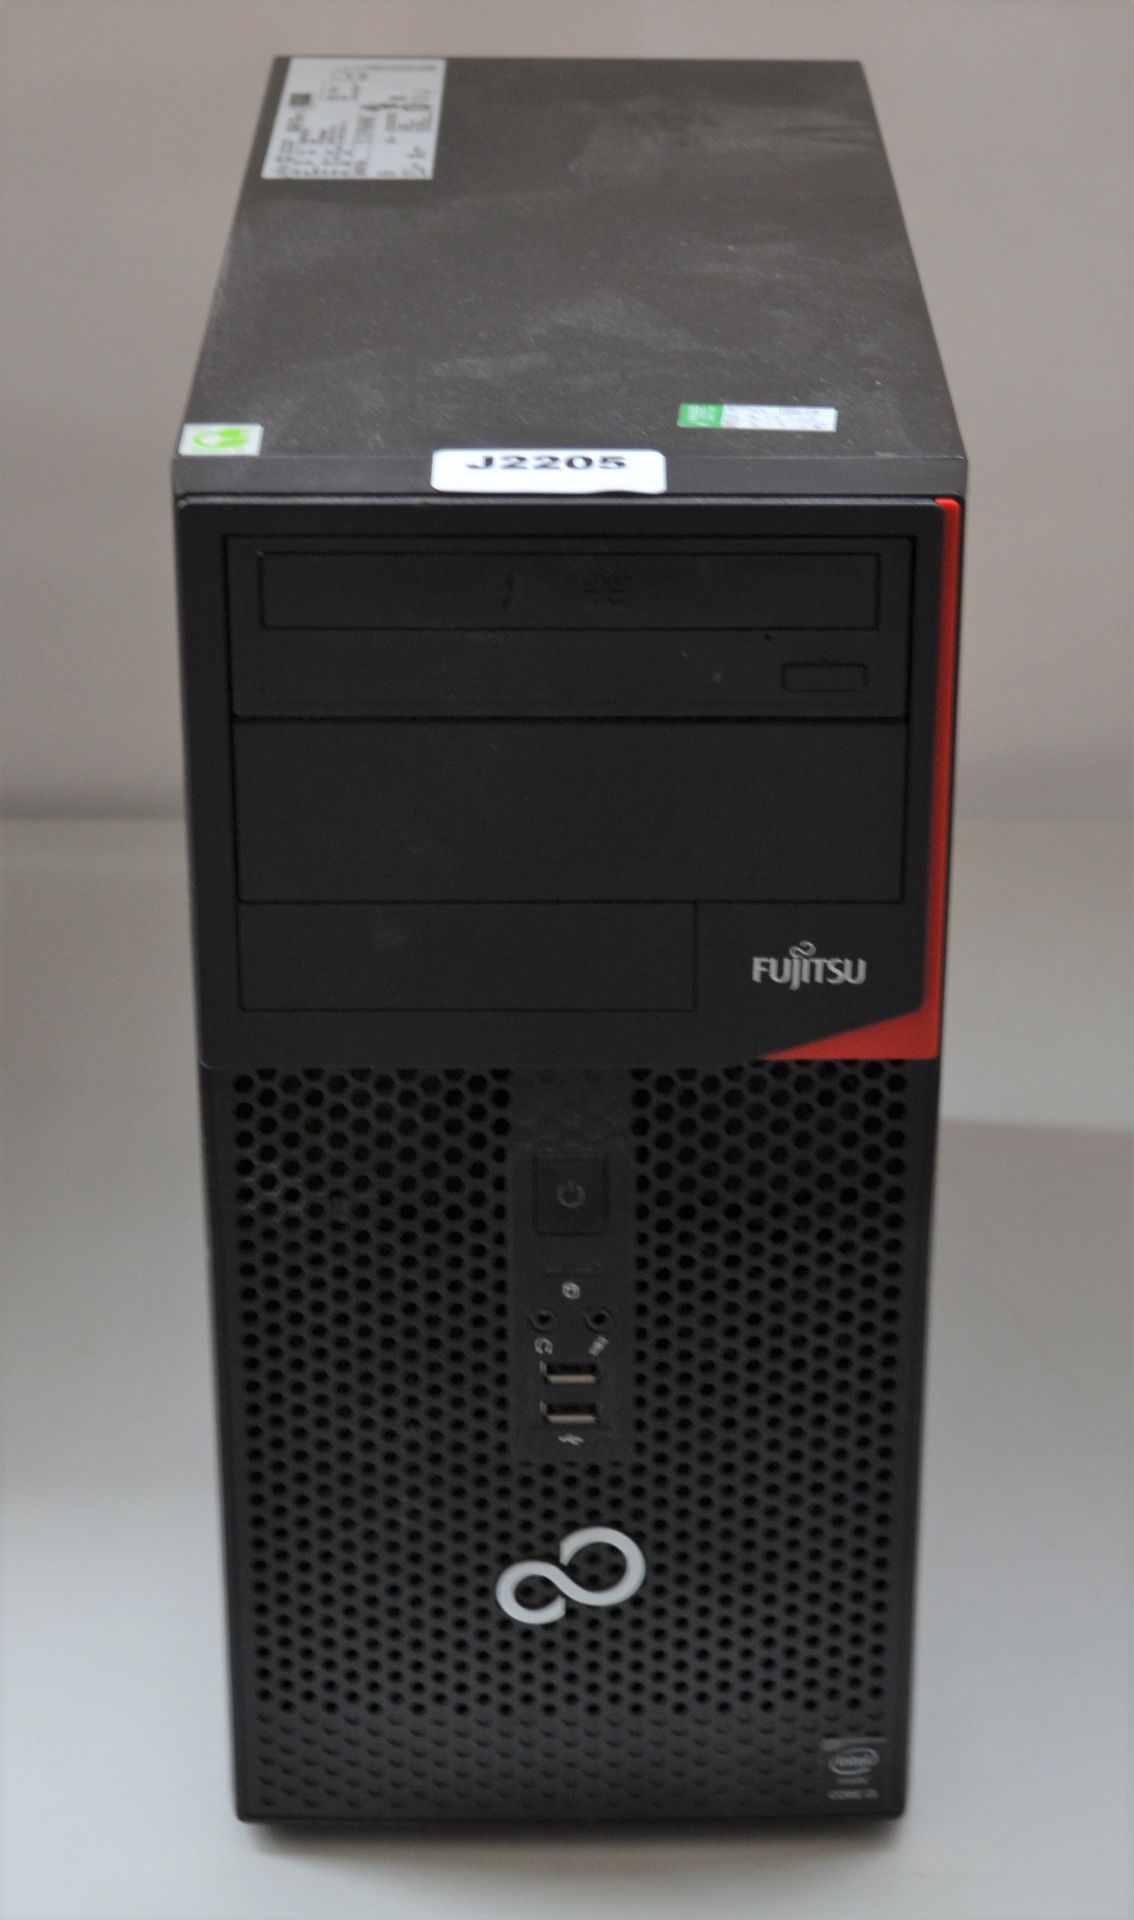 1 x Fujitsu Esprimo P420 Desktop PC With Hanns G 22 Inch Flat Screen Monitor - Features Intel i3- - Image 4 of 5